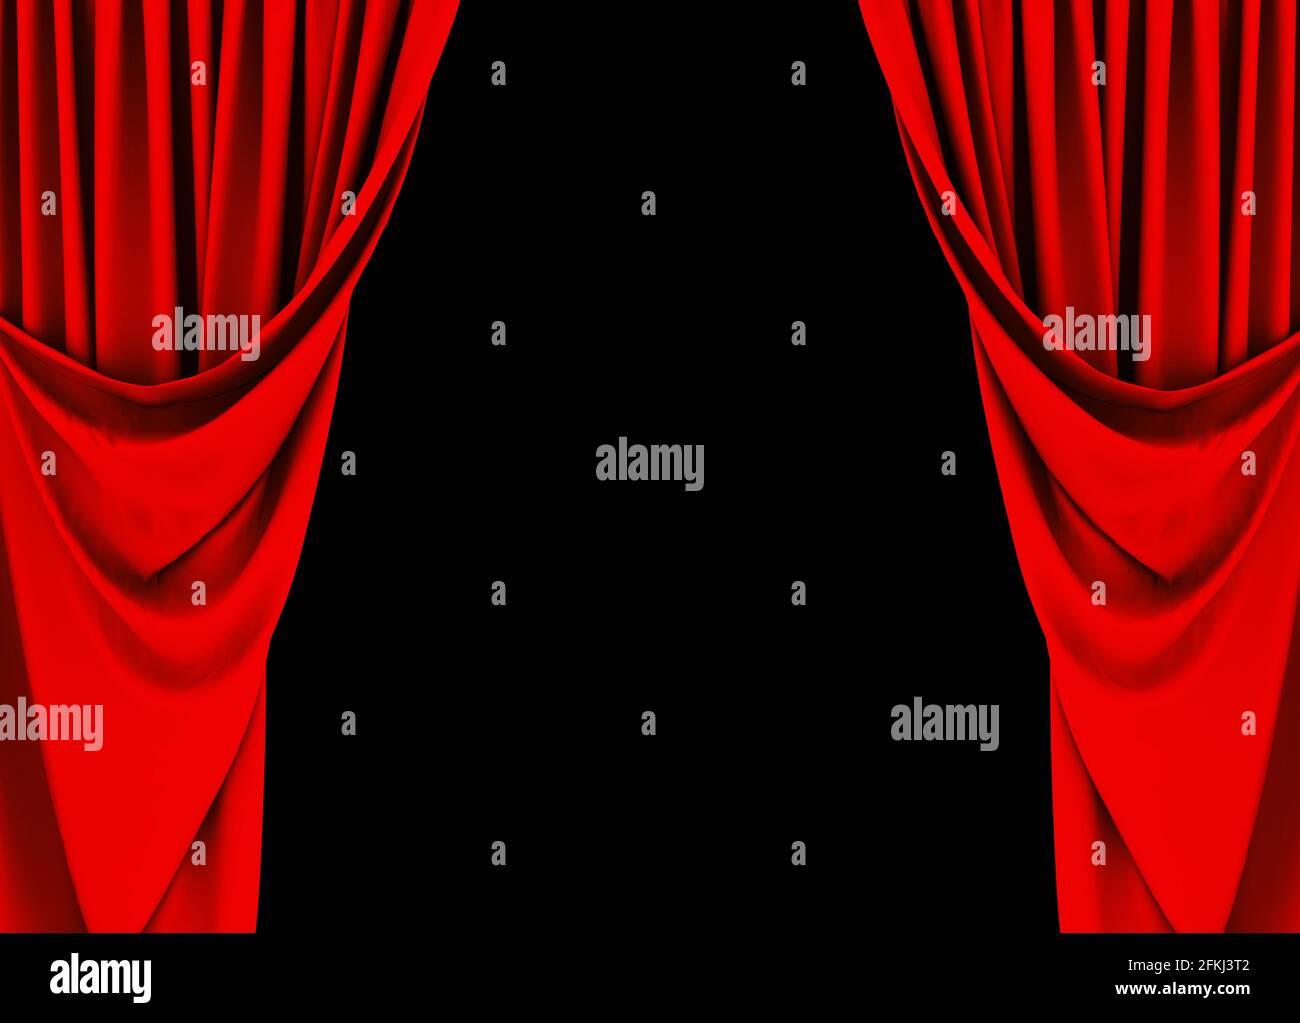 Red curtain, red curtain background, theater Stock Photo